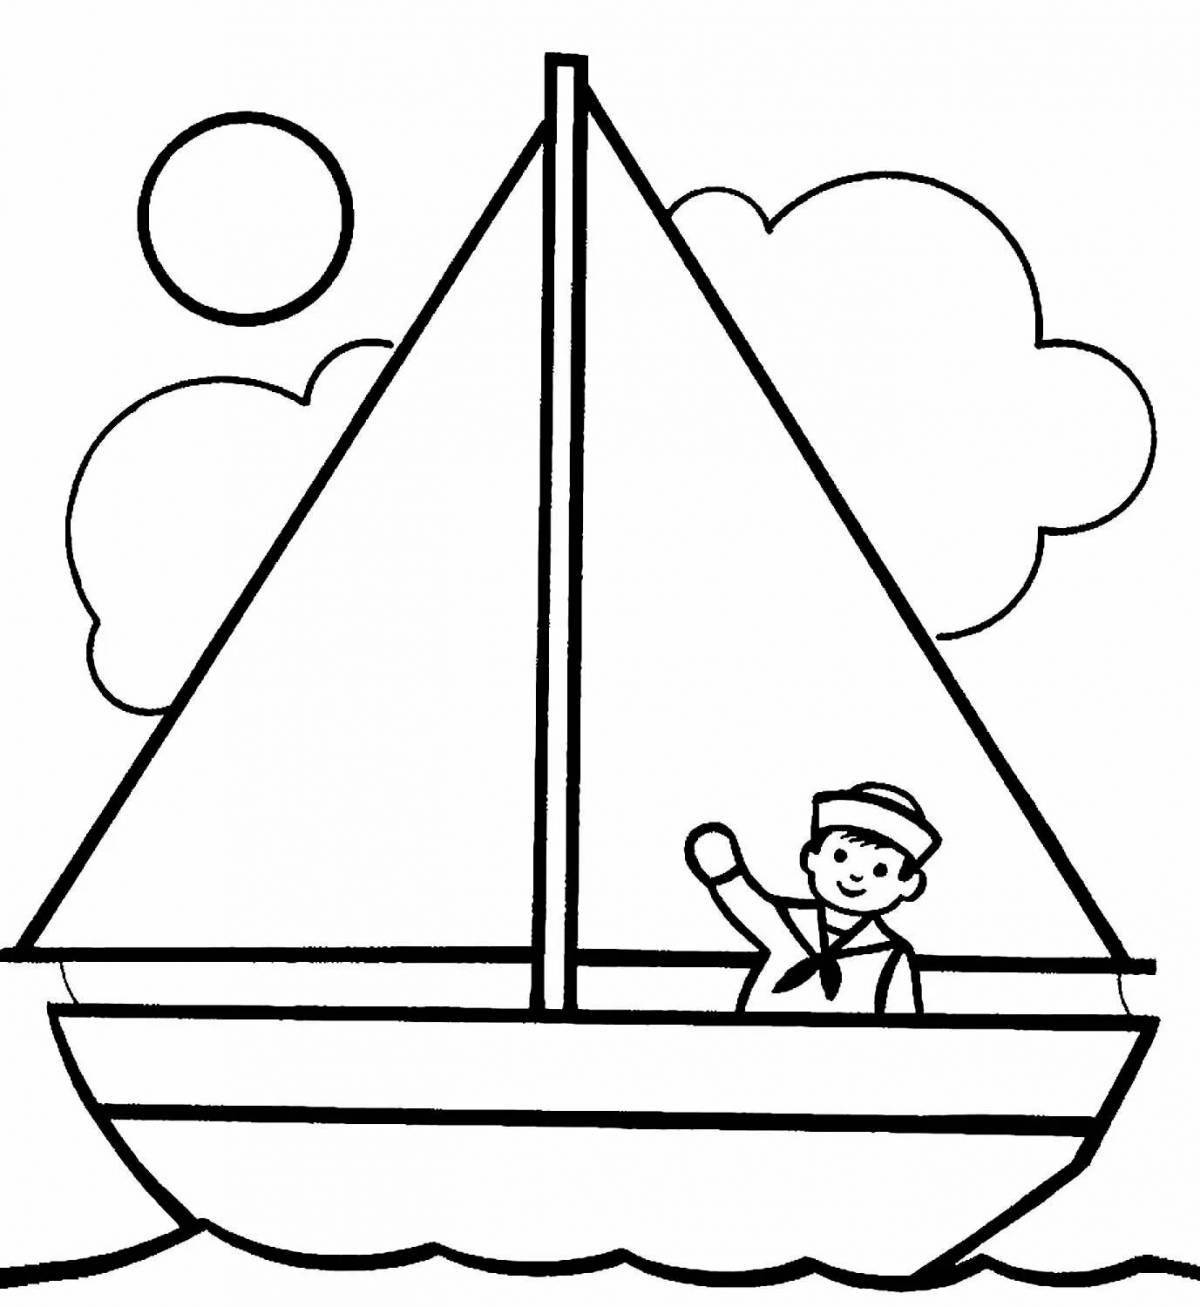 Brilliant sailing ship coloring page for students